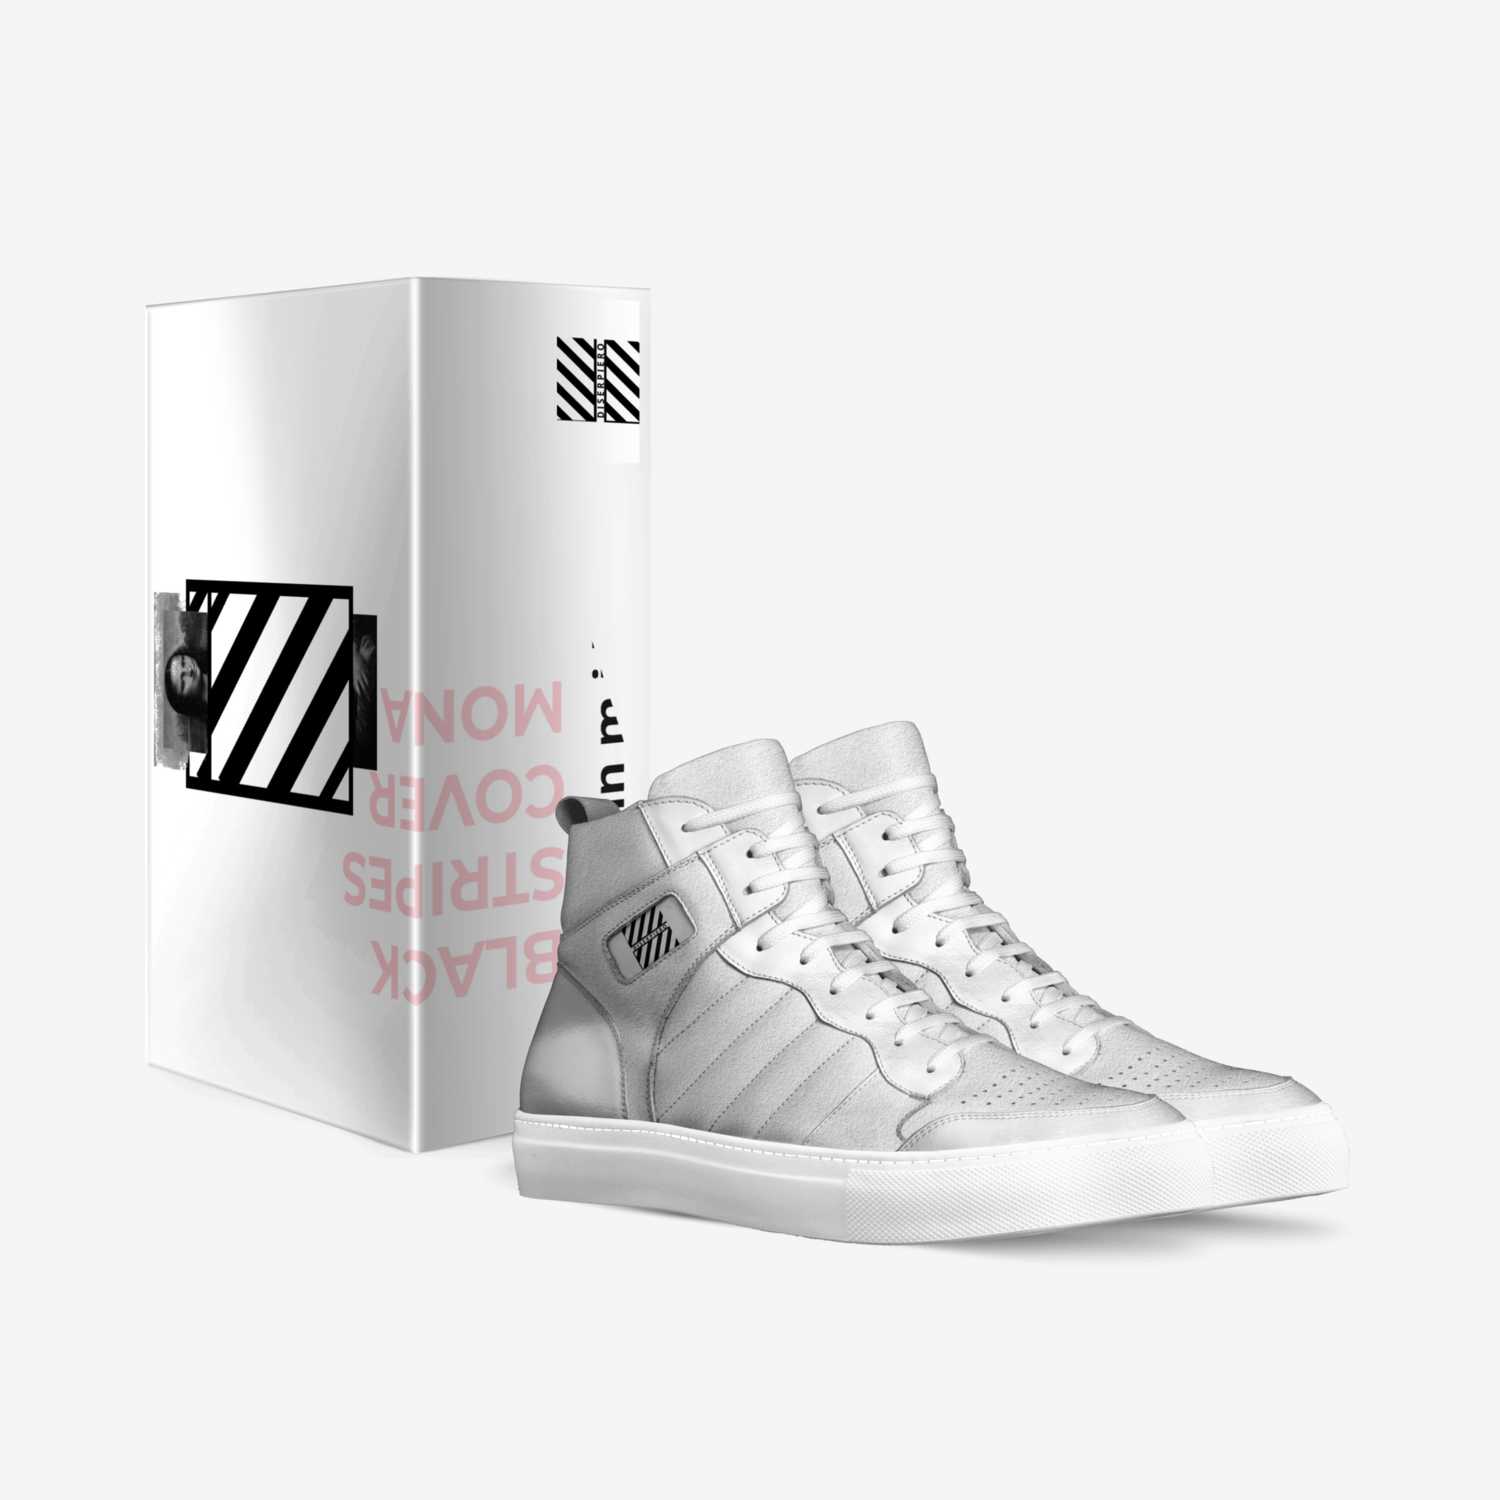 WHITE DESIGN custom made in Italy shoes by Di Ser Piero | Box view